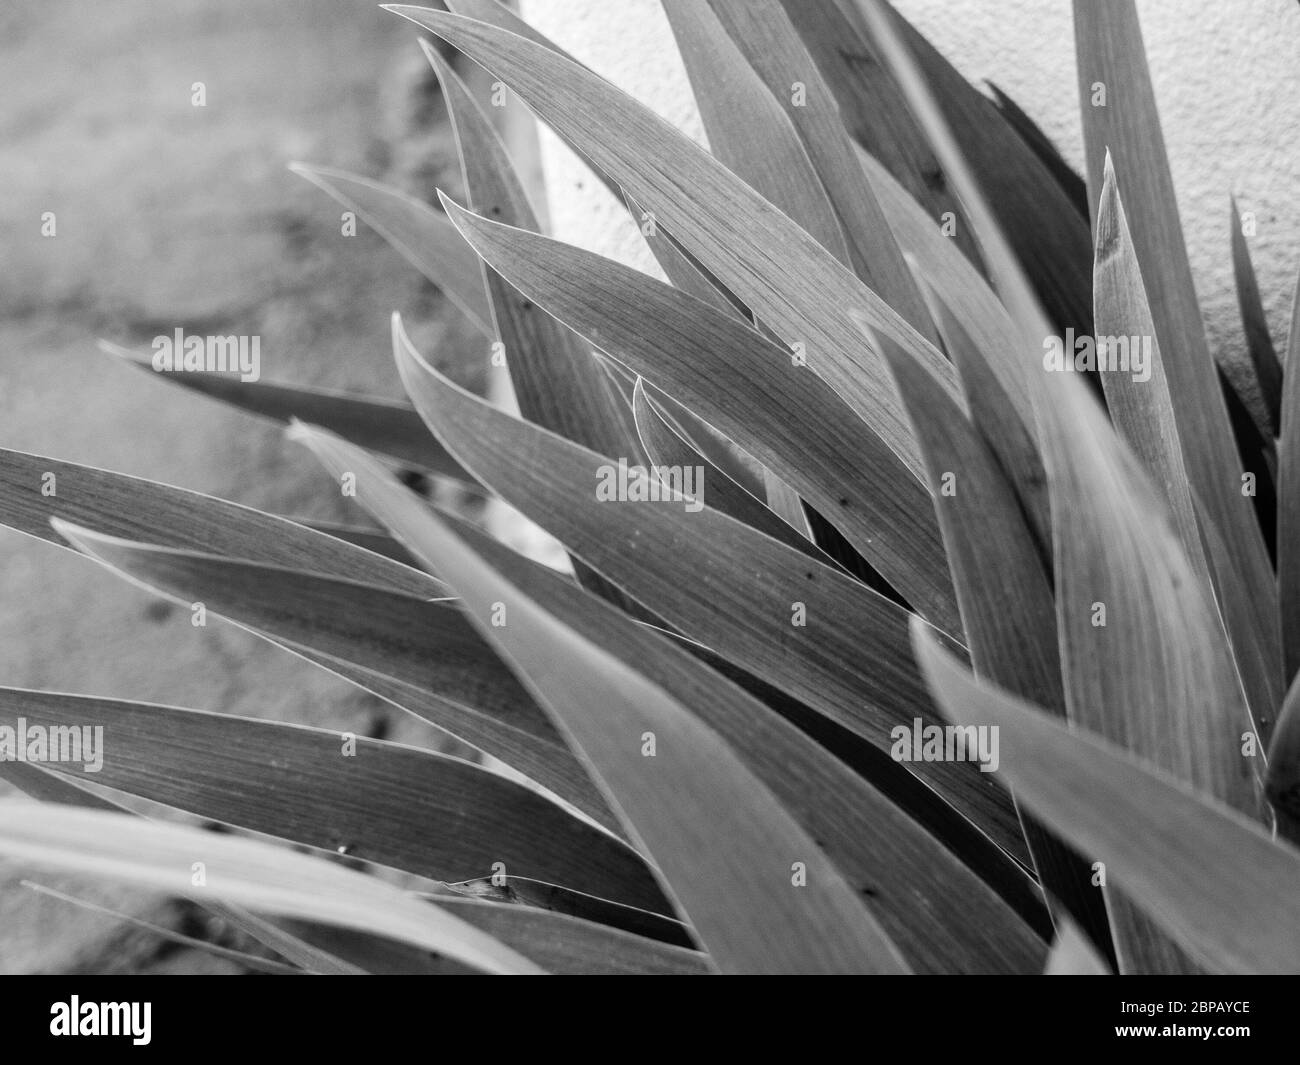 Black and white image of plant leaves. Stock Photo